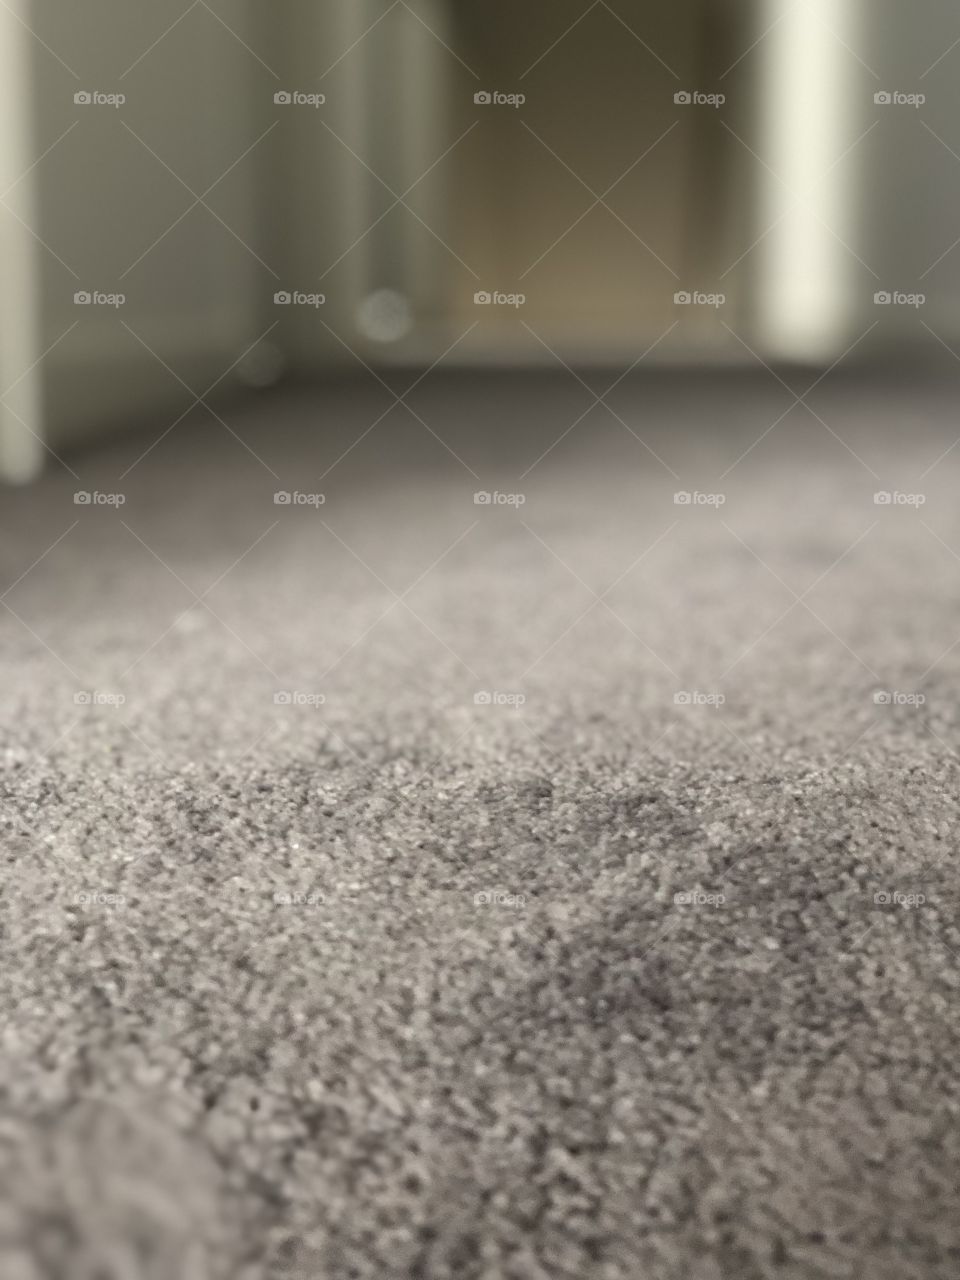 This shows some carpet that has a big blur in the background shows the fluffy texture.